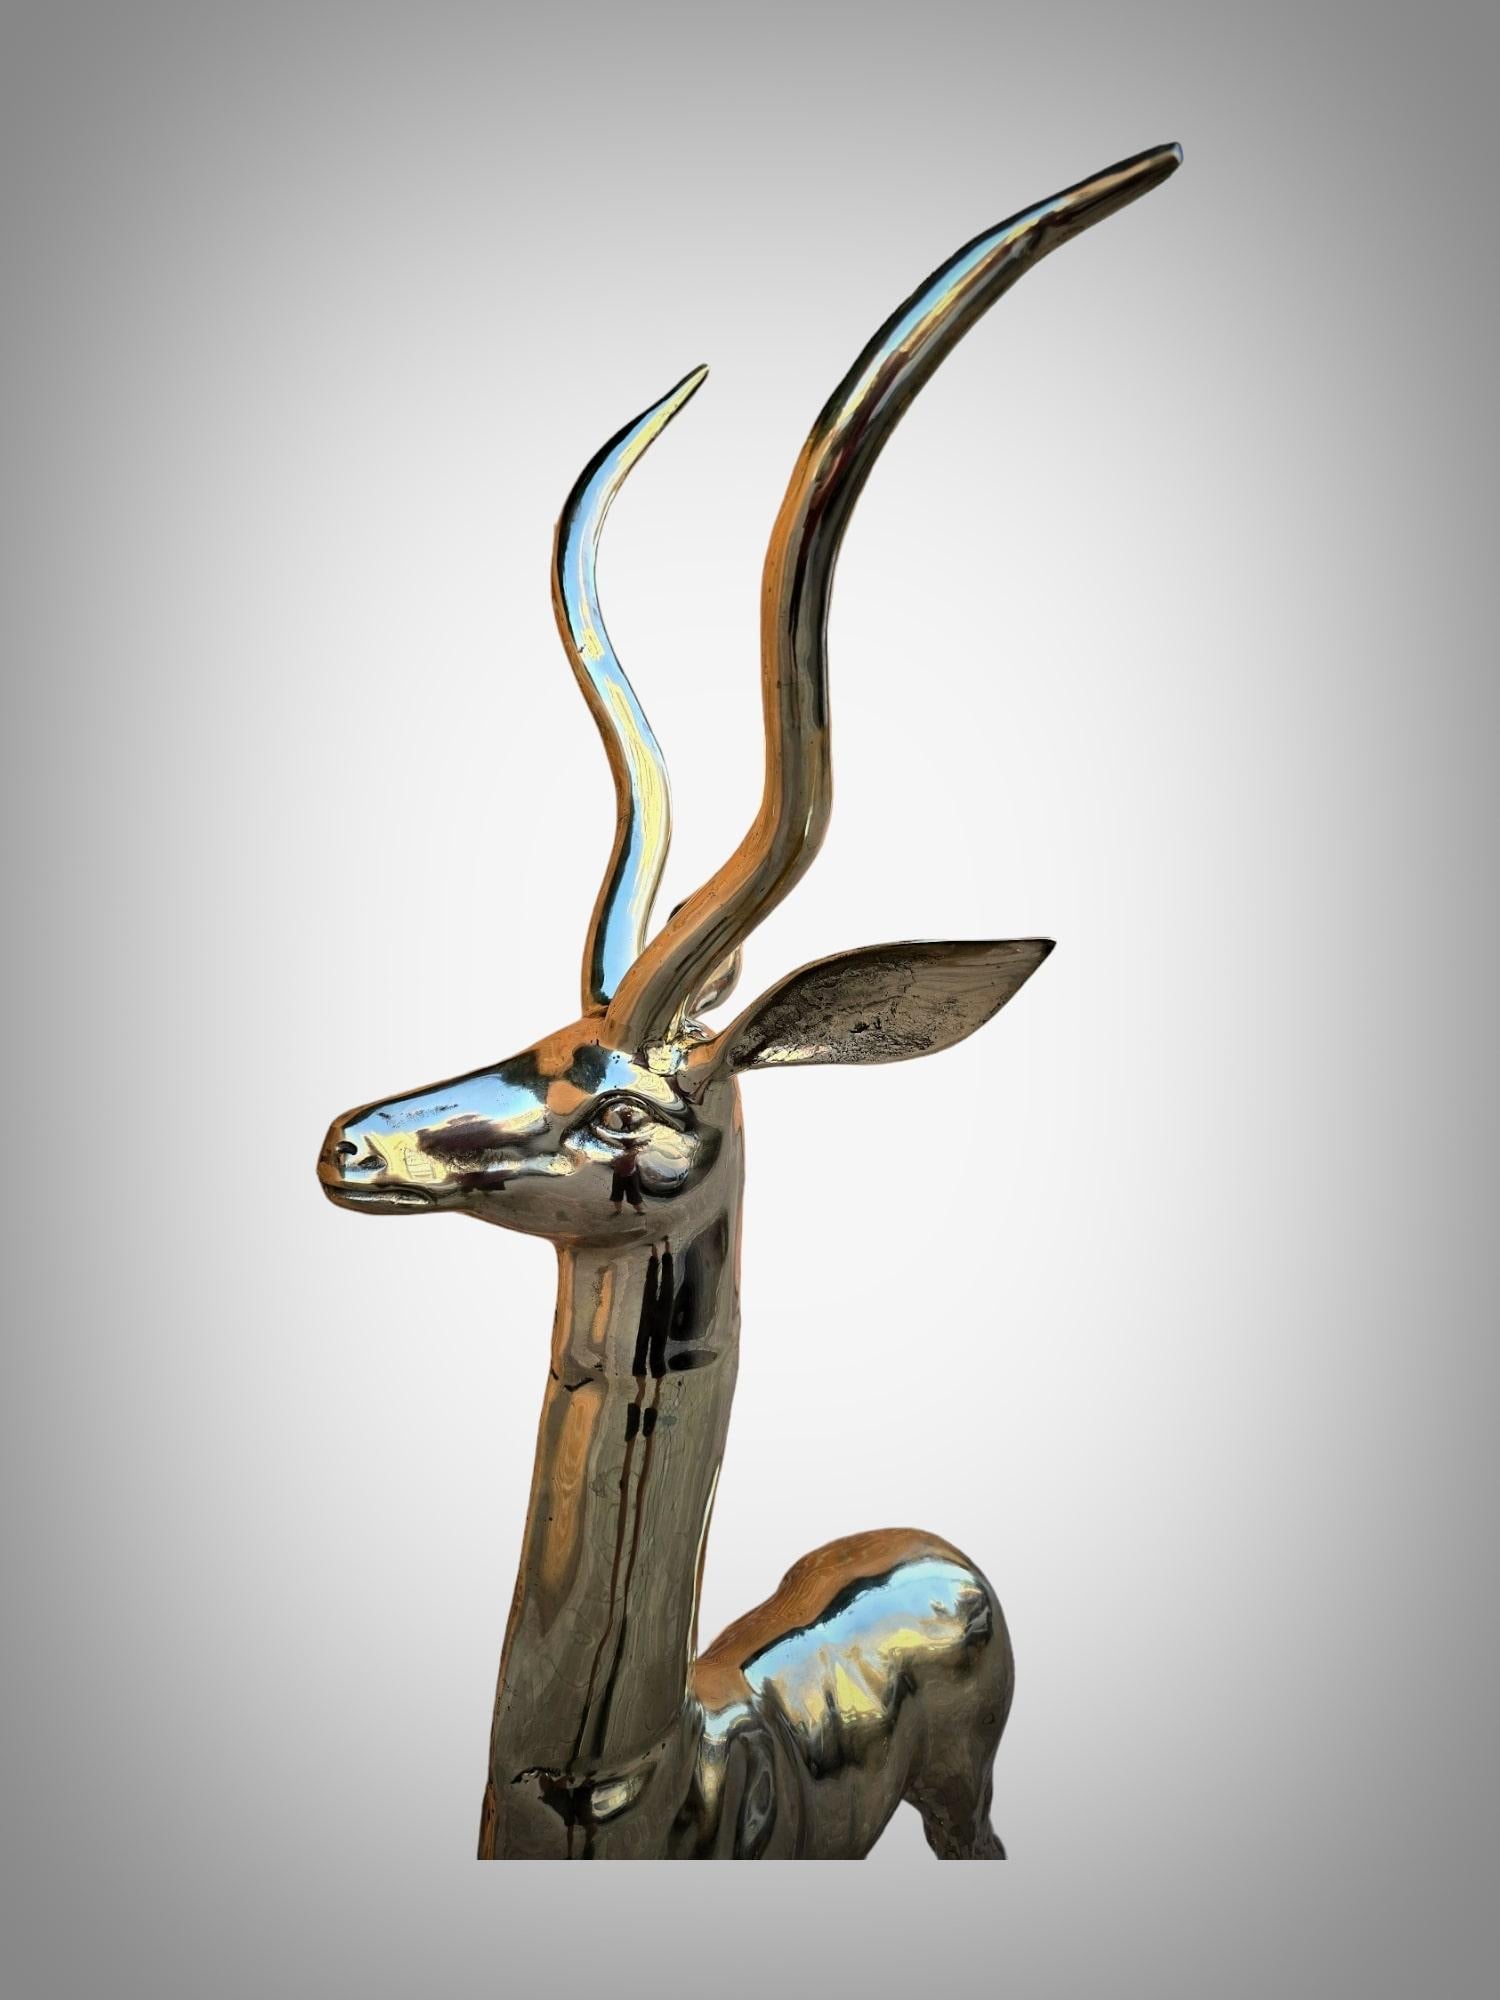 Exquisite Polished Bronze Sculpture: Lifesize Antelope from the 1950s For Sale 1